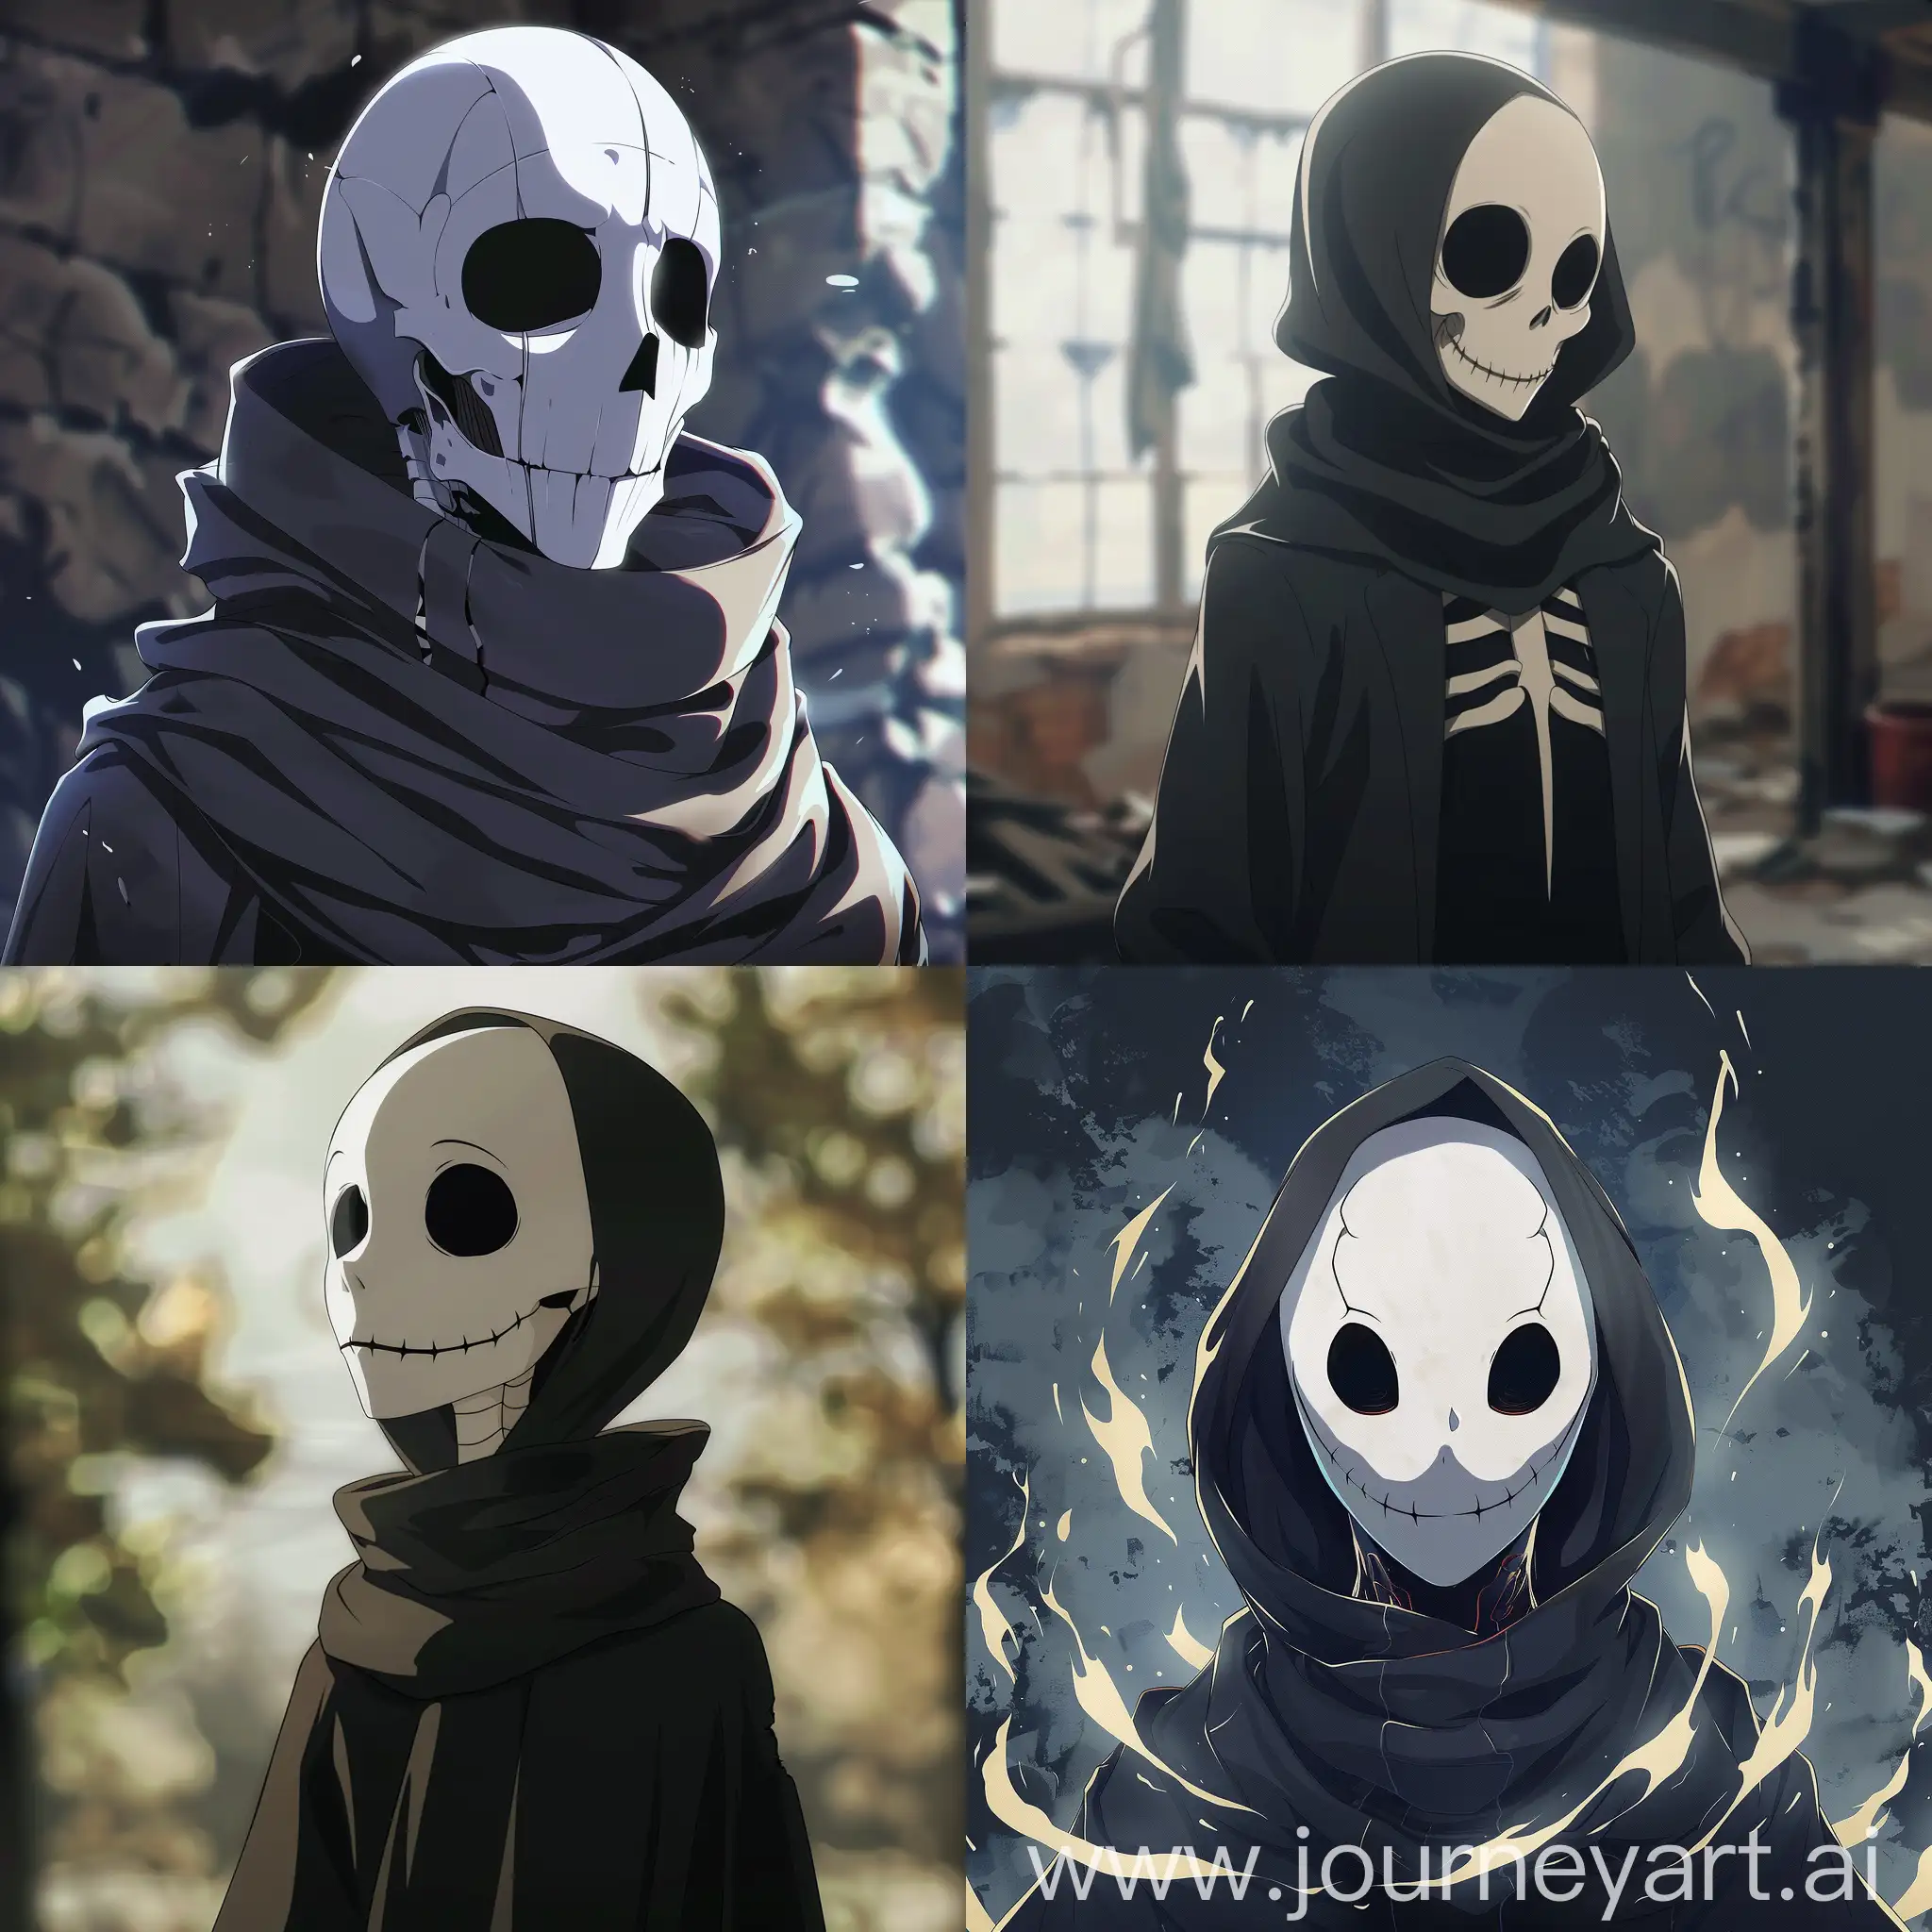 Gaster from undertale in anime 2D